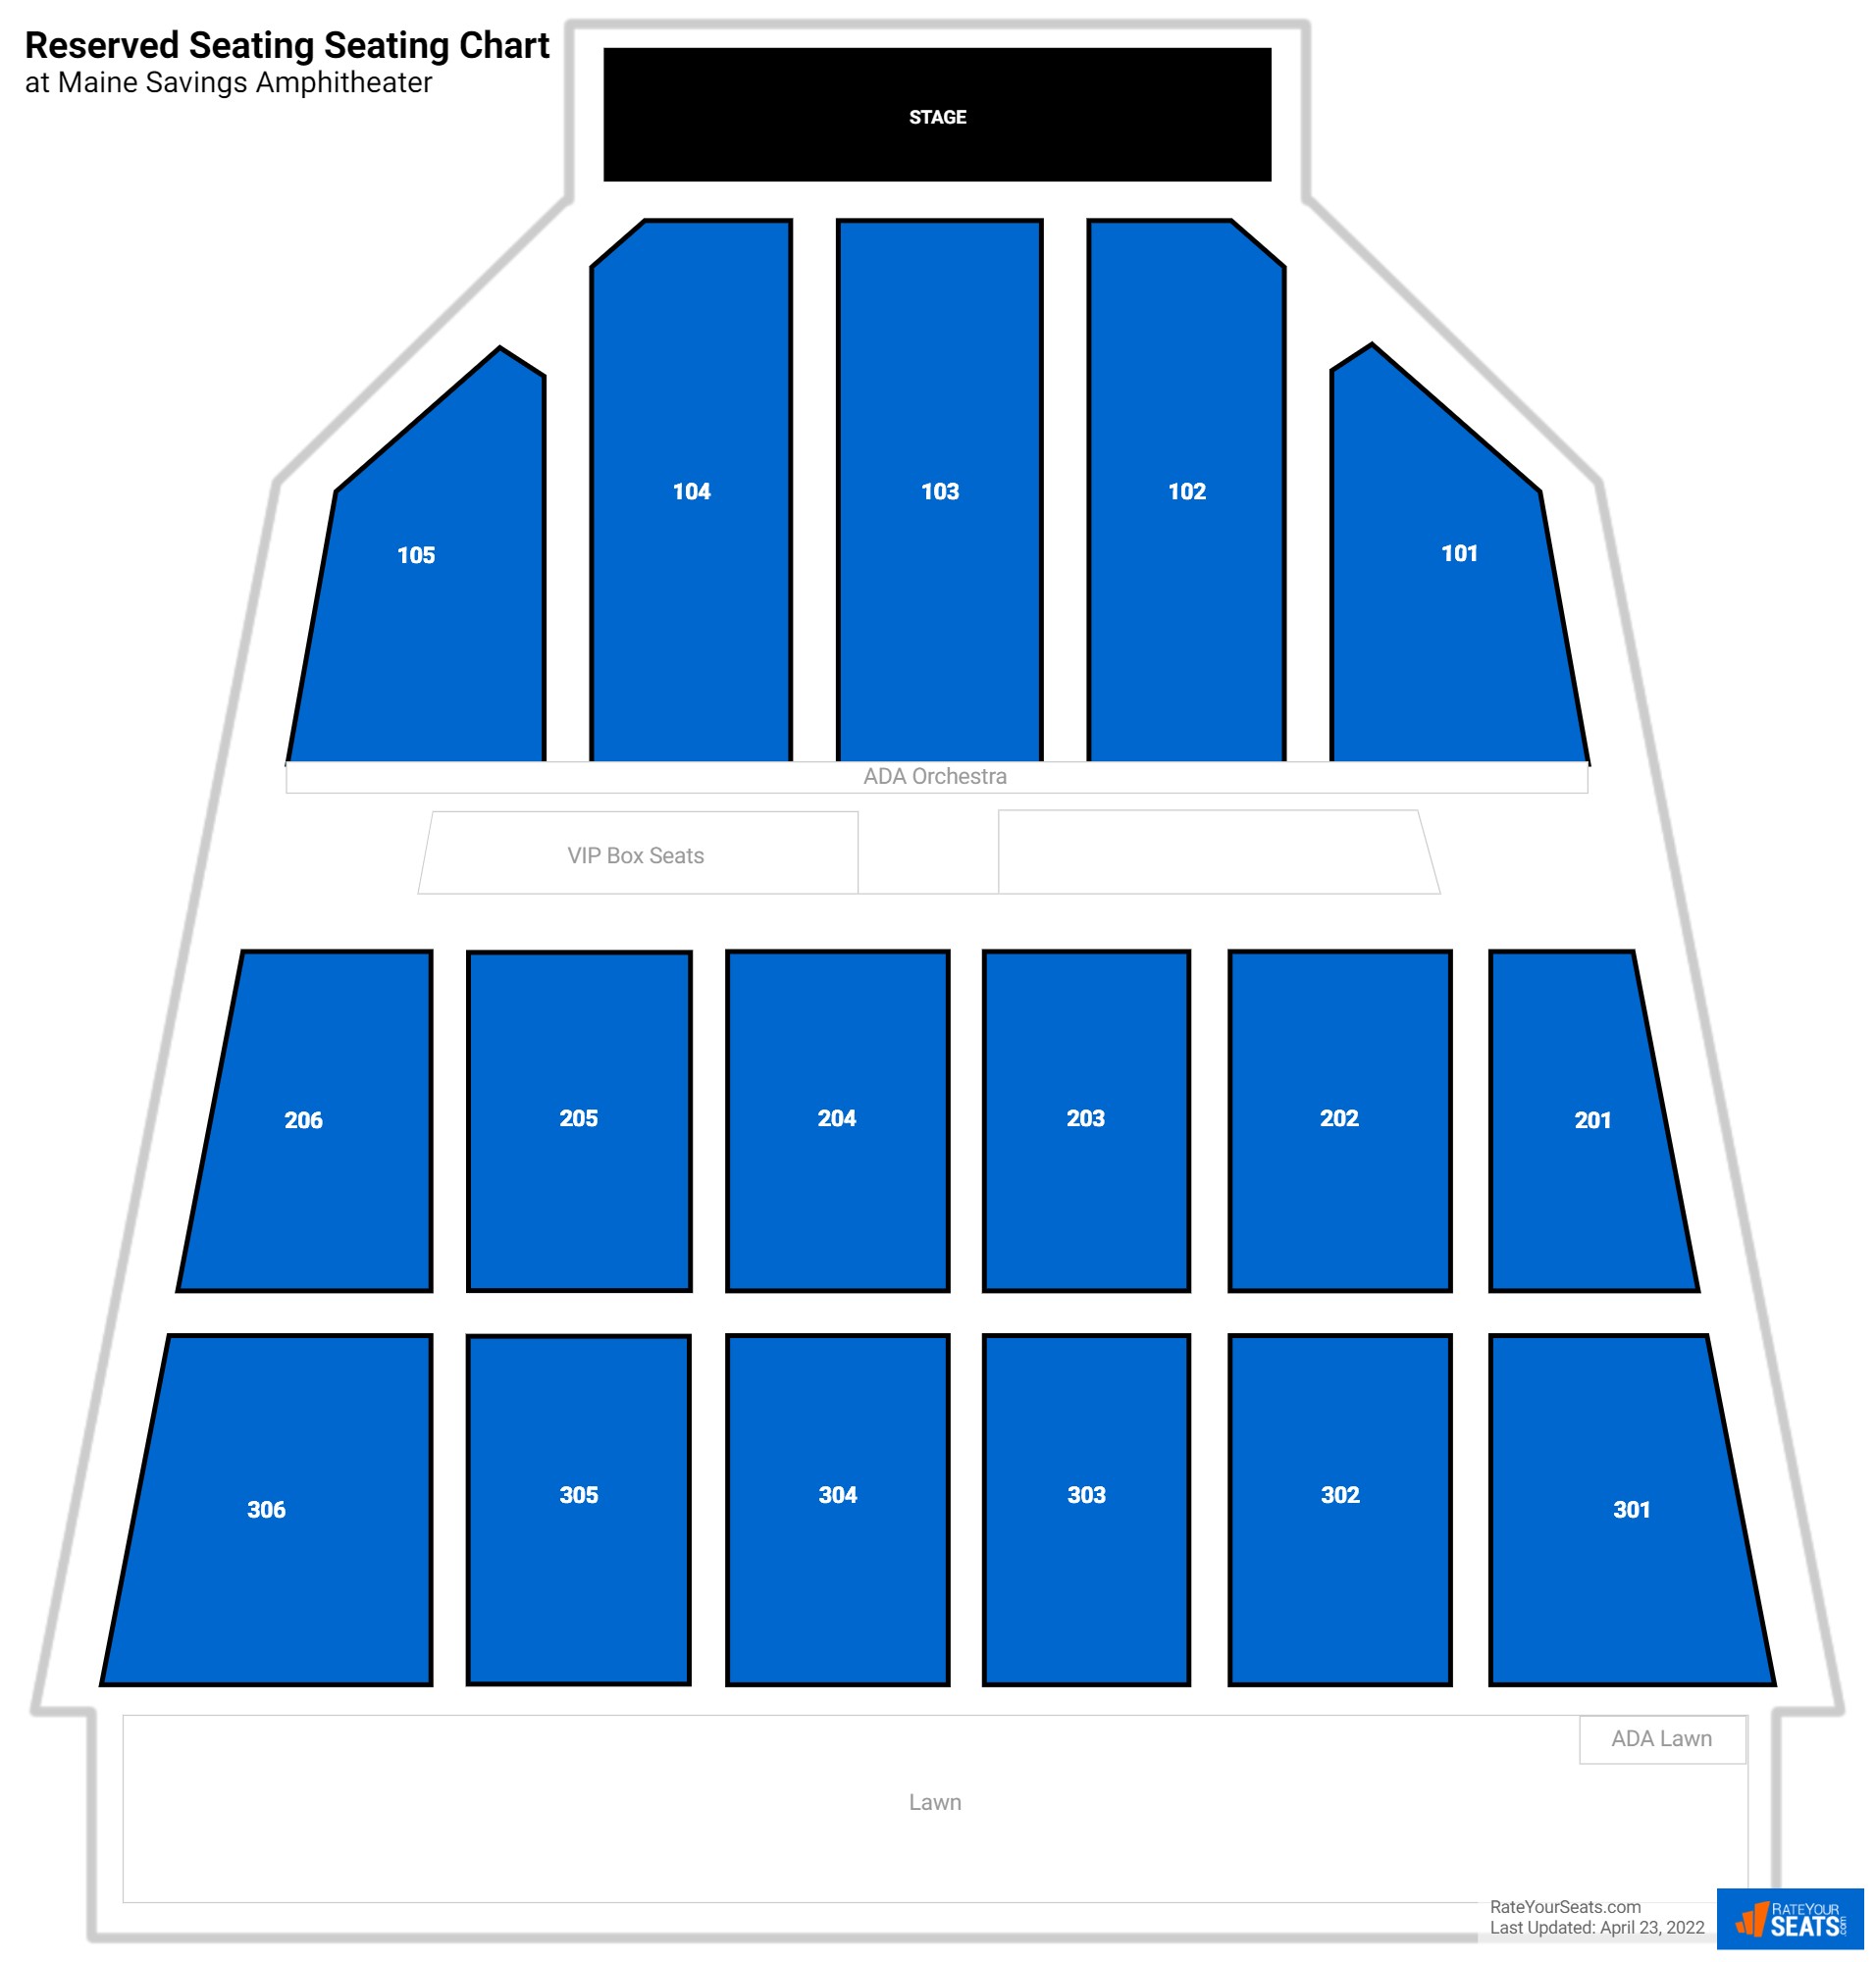 Concert Reserved Seating Seating Chart at Maine Savings Amphitheater